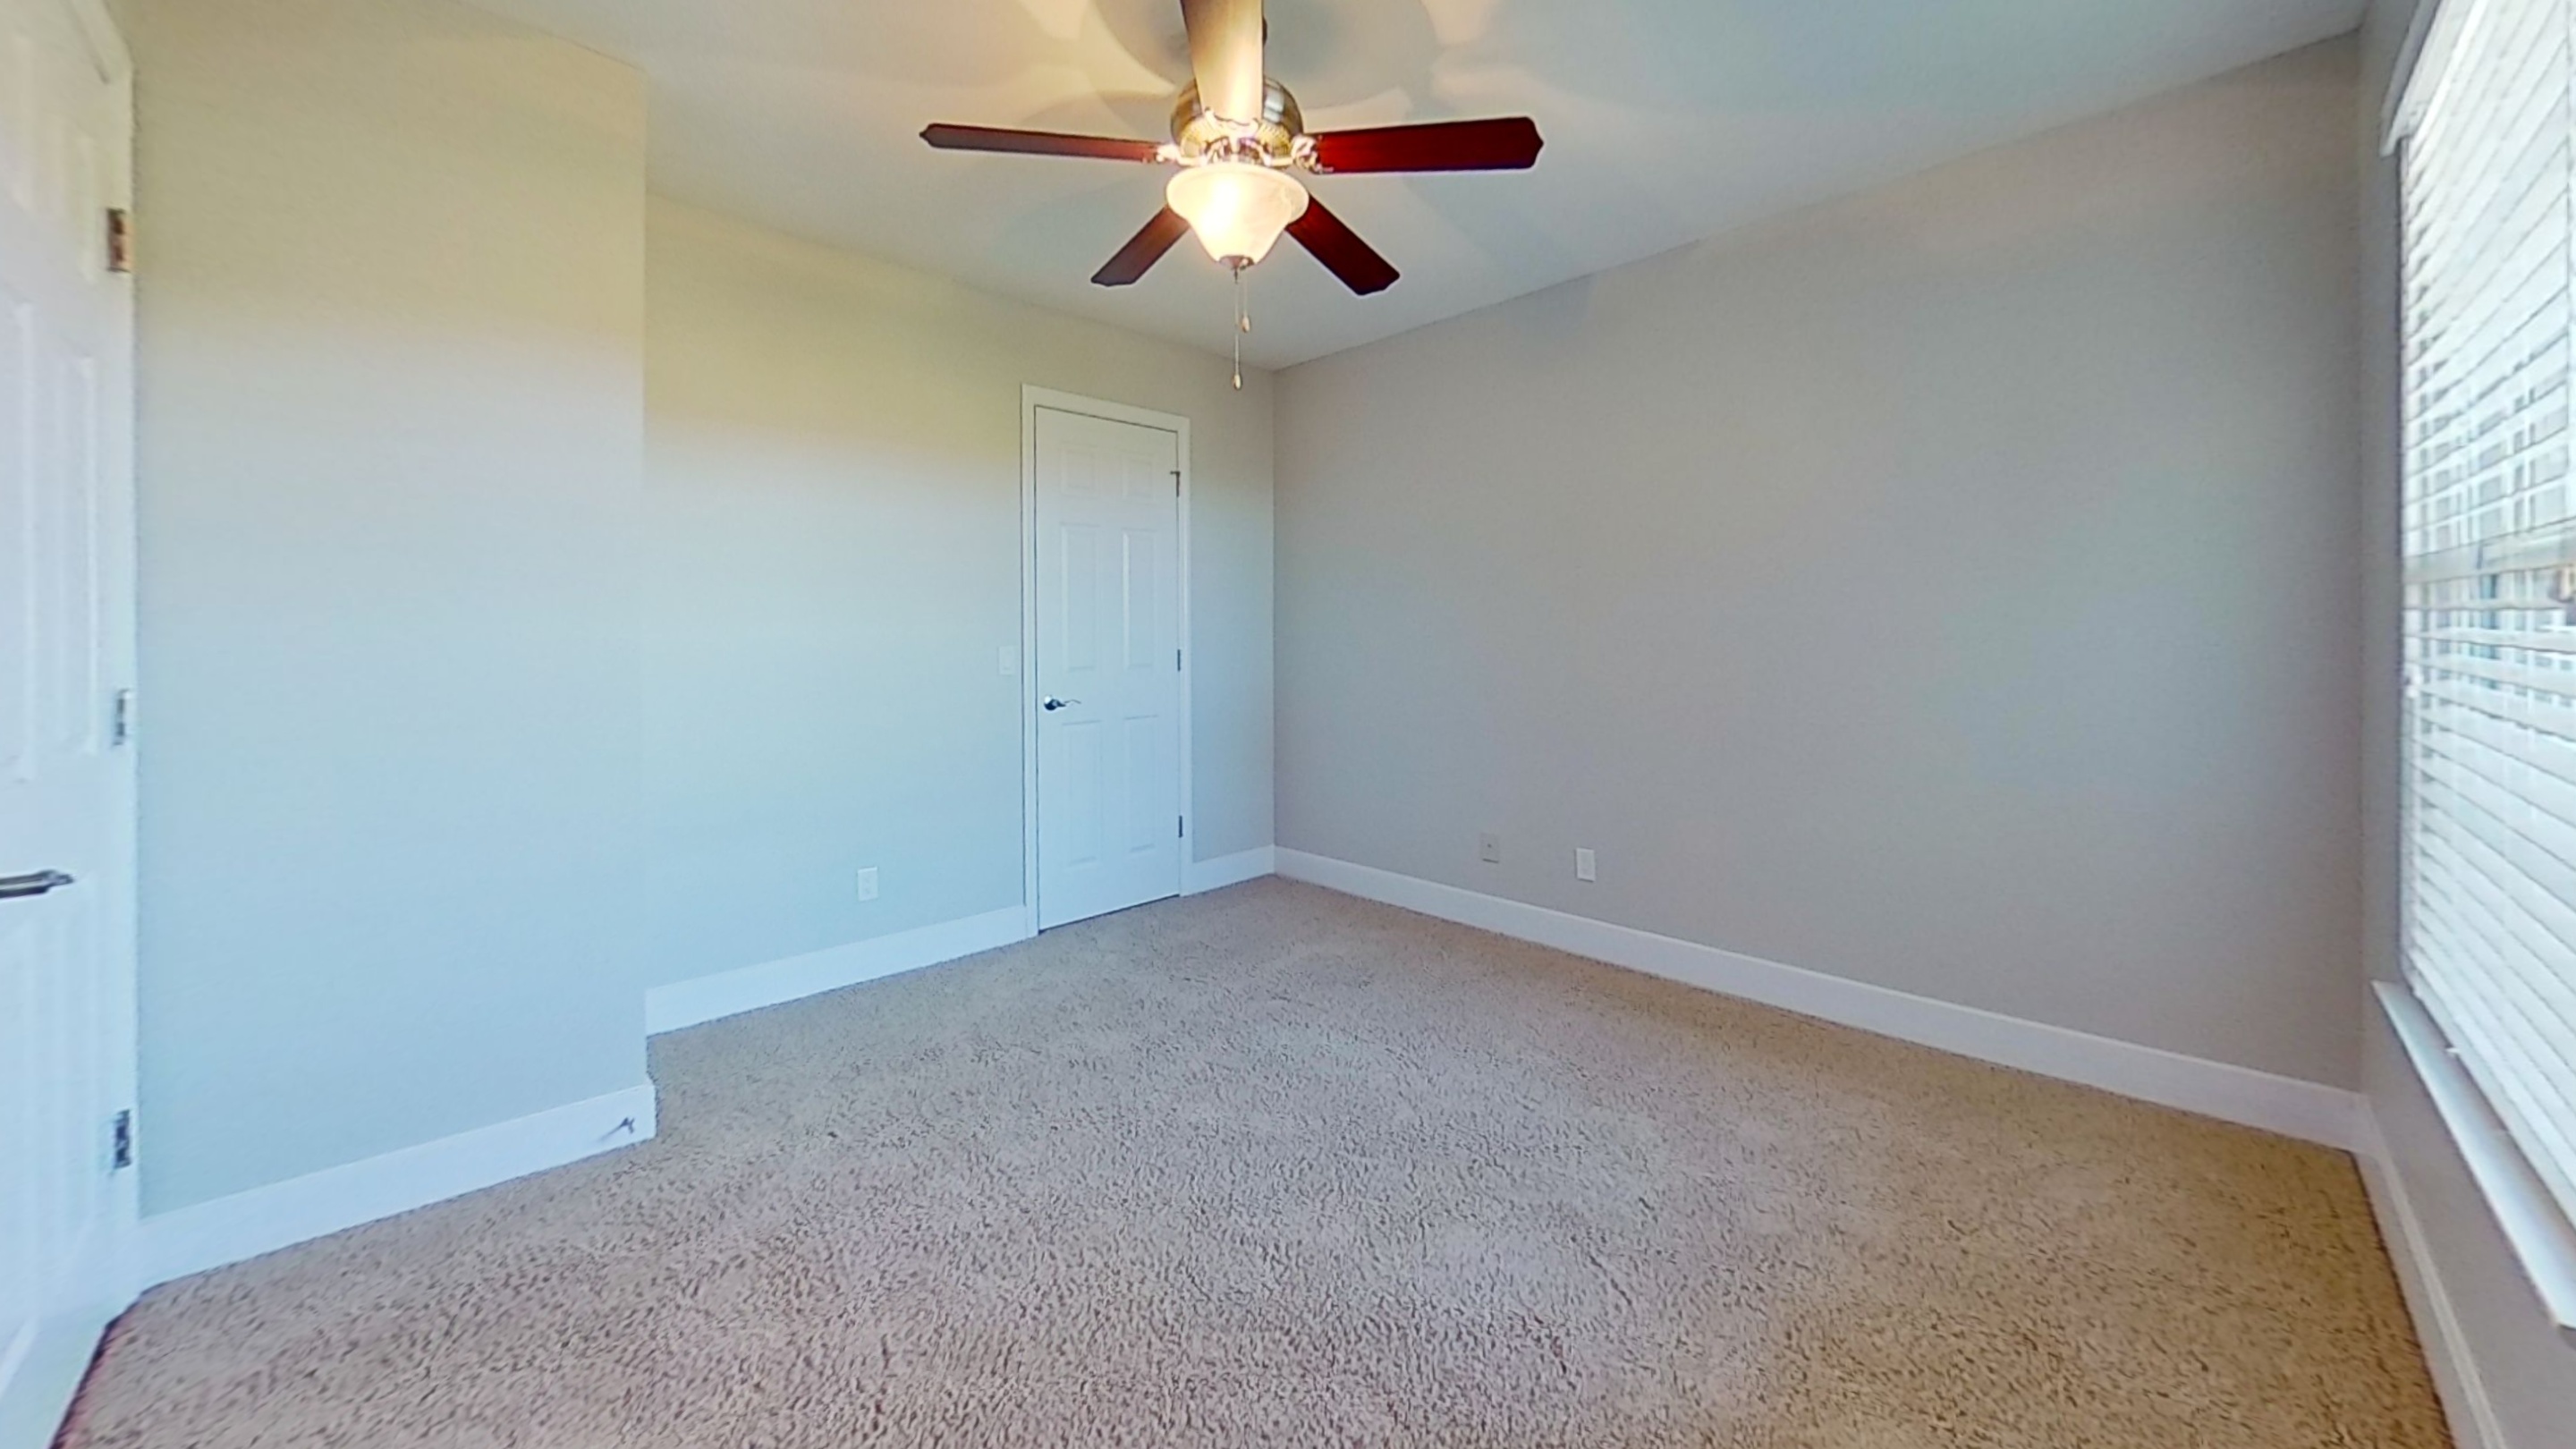 Bedroom With Ceiling Fan at Polo Downs Apartments in Fenton, MO